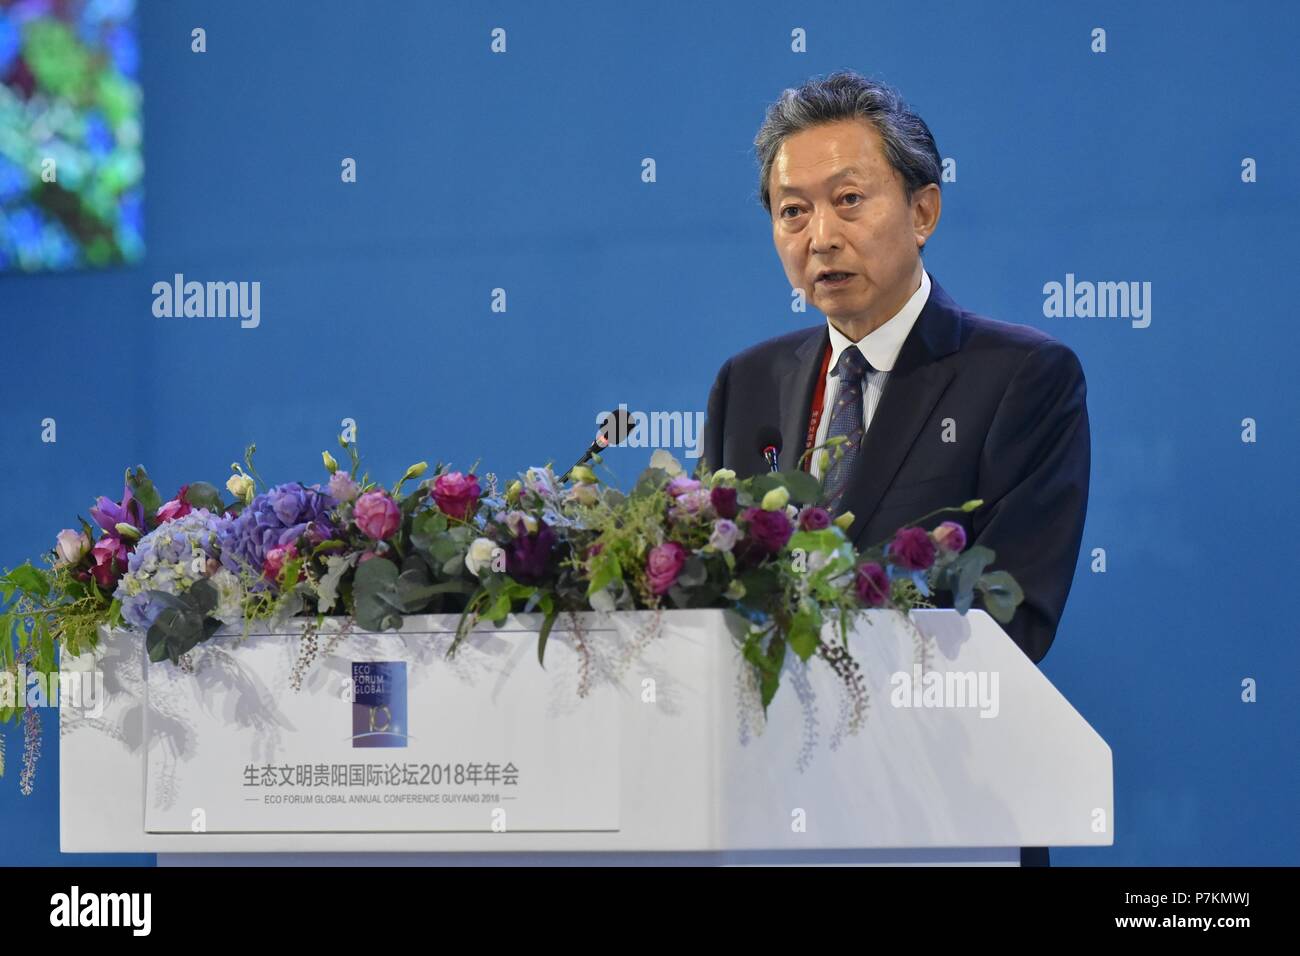 Guiyang, China's Guizhou Province. 7th July, 2018. Former Japanese Prime Minister Yukio Hatoyama speaks at the opening ceremony of the Eco Forum Global Annual Conference Guiyang 2018 held in Guiyang, capital of southwest China's Guizhou Province, July 7, 2018. Credit: Ou Dongqu/Xinhua/Alamy Live News Stock Photo